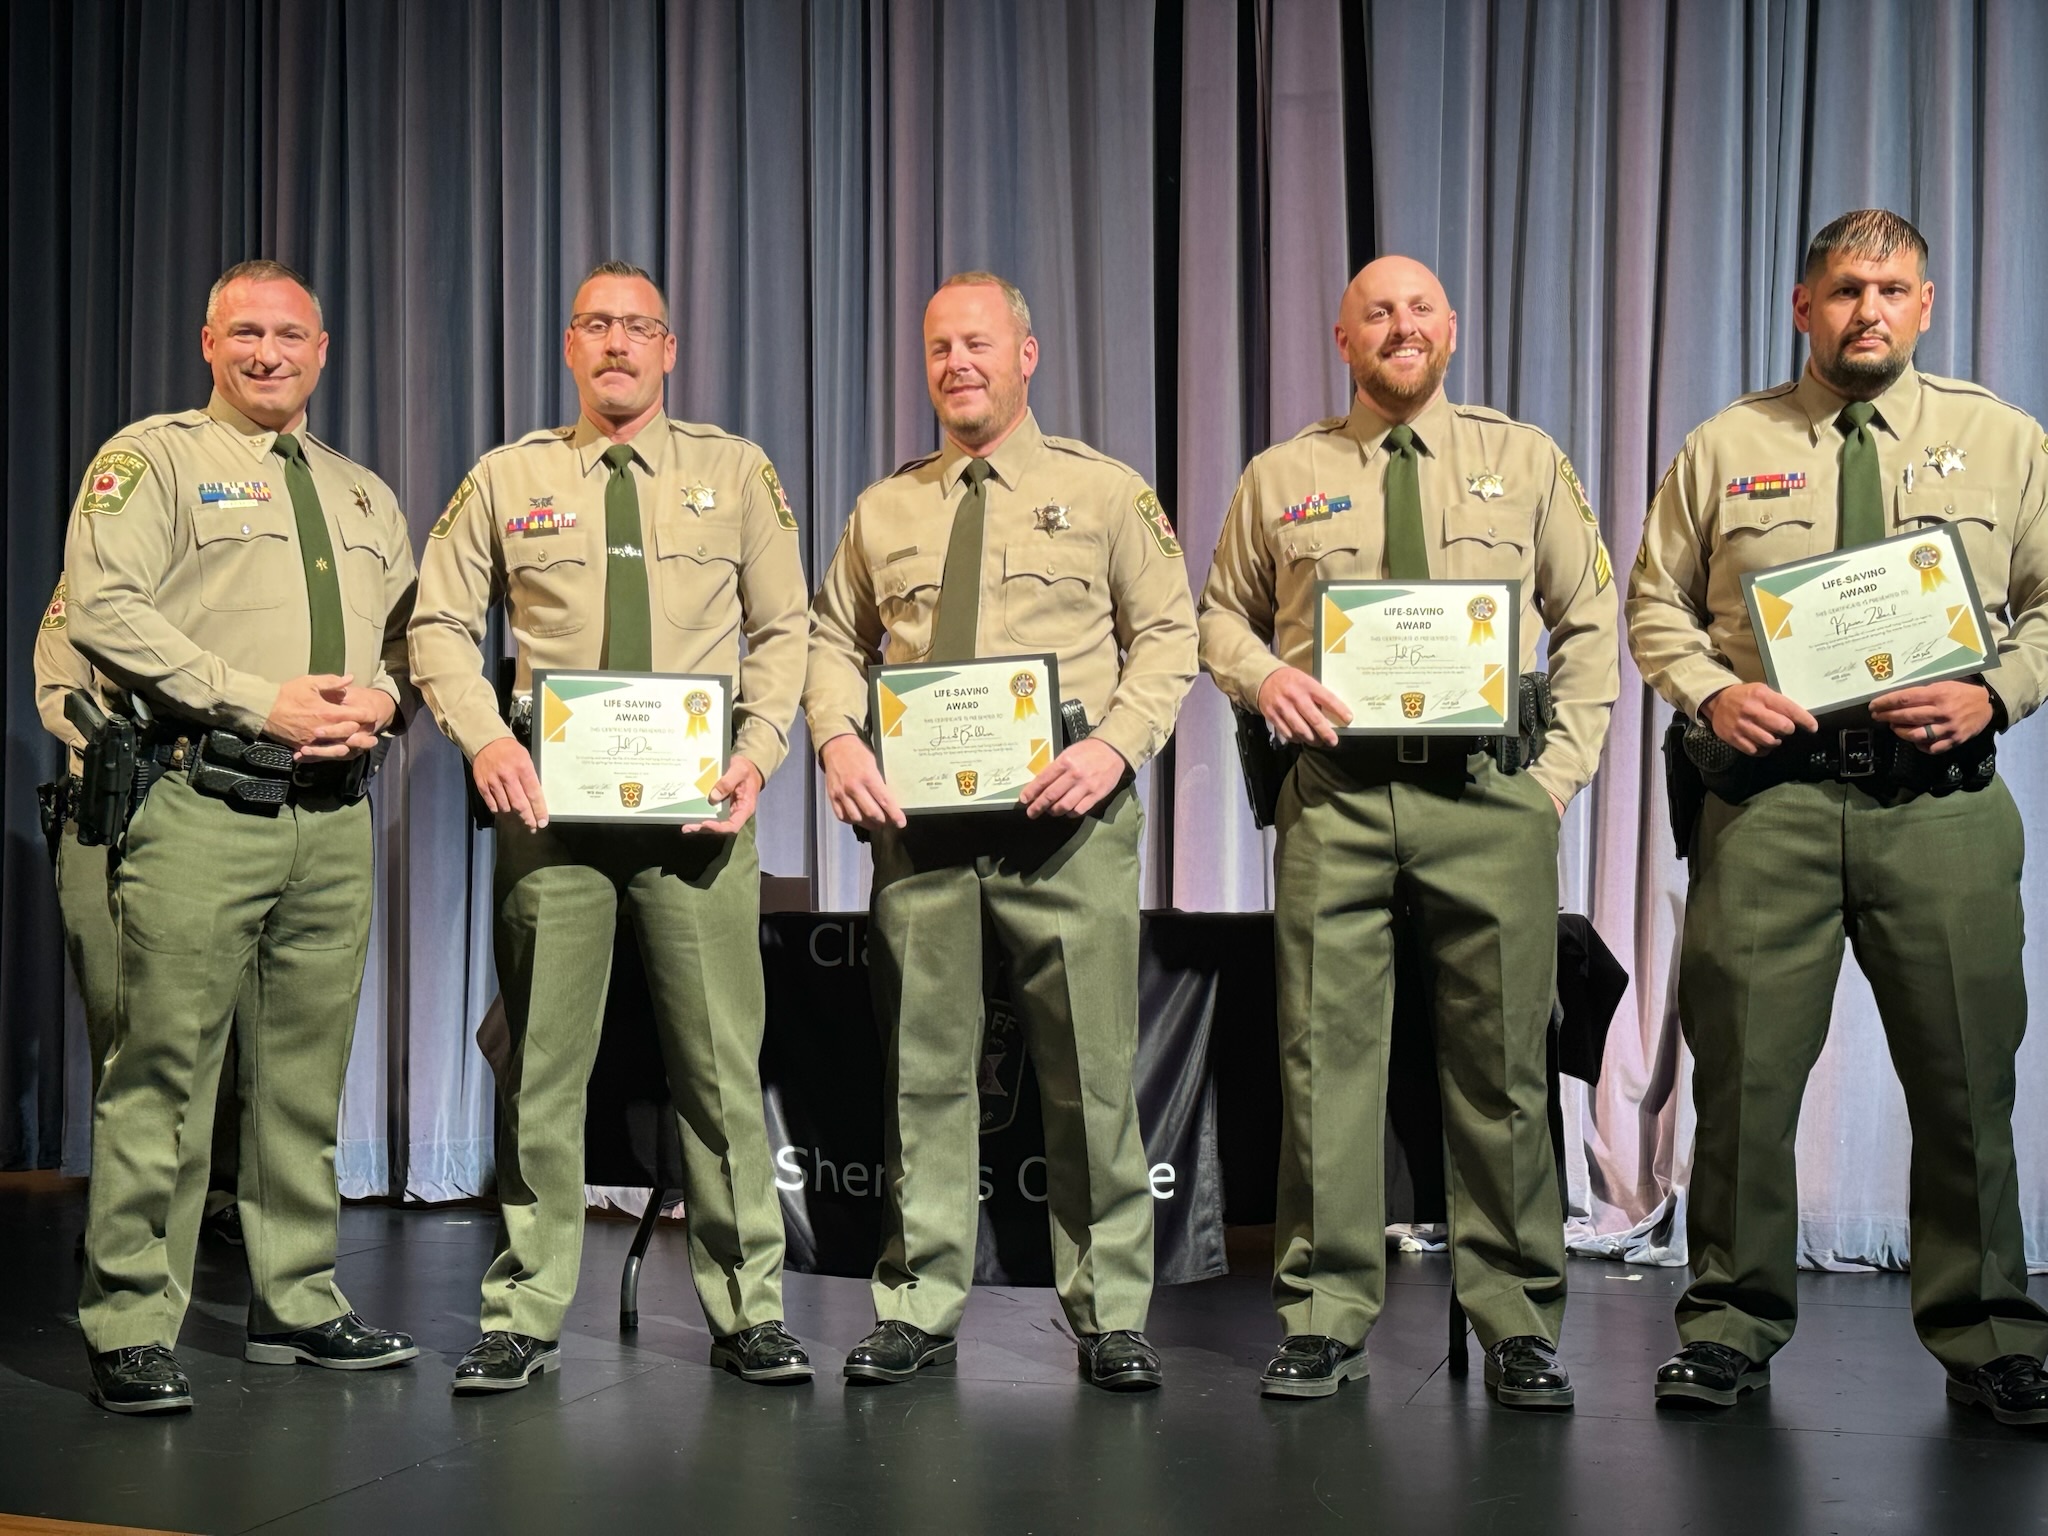 Deputies honored for acts of heroism